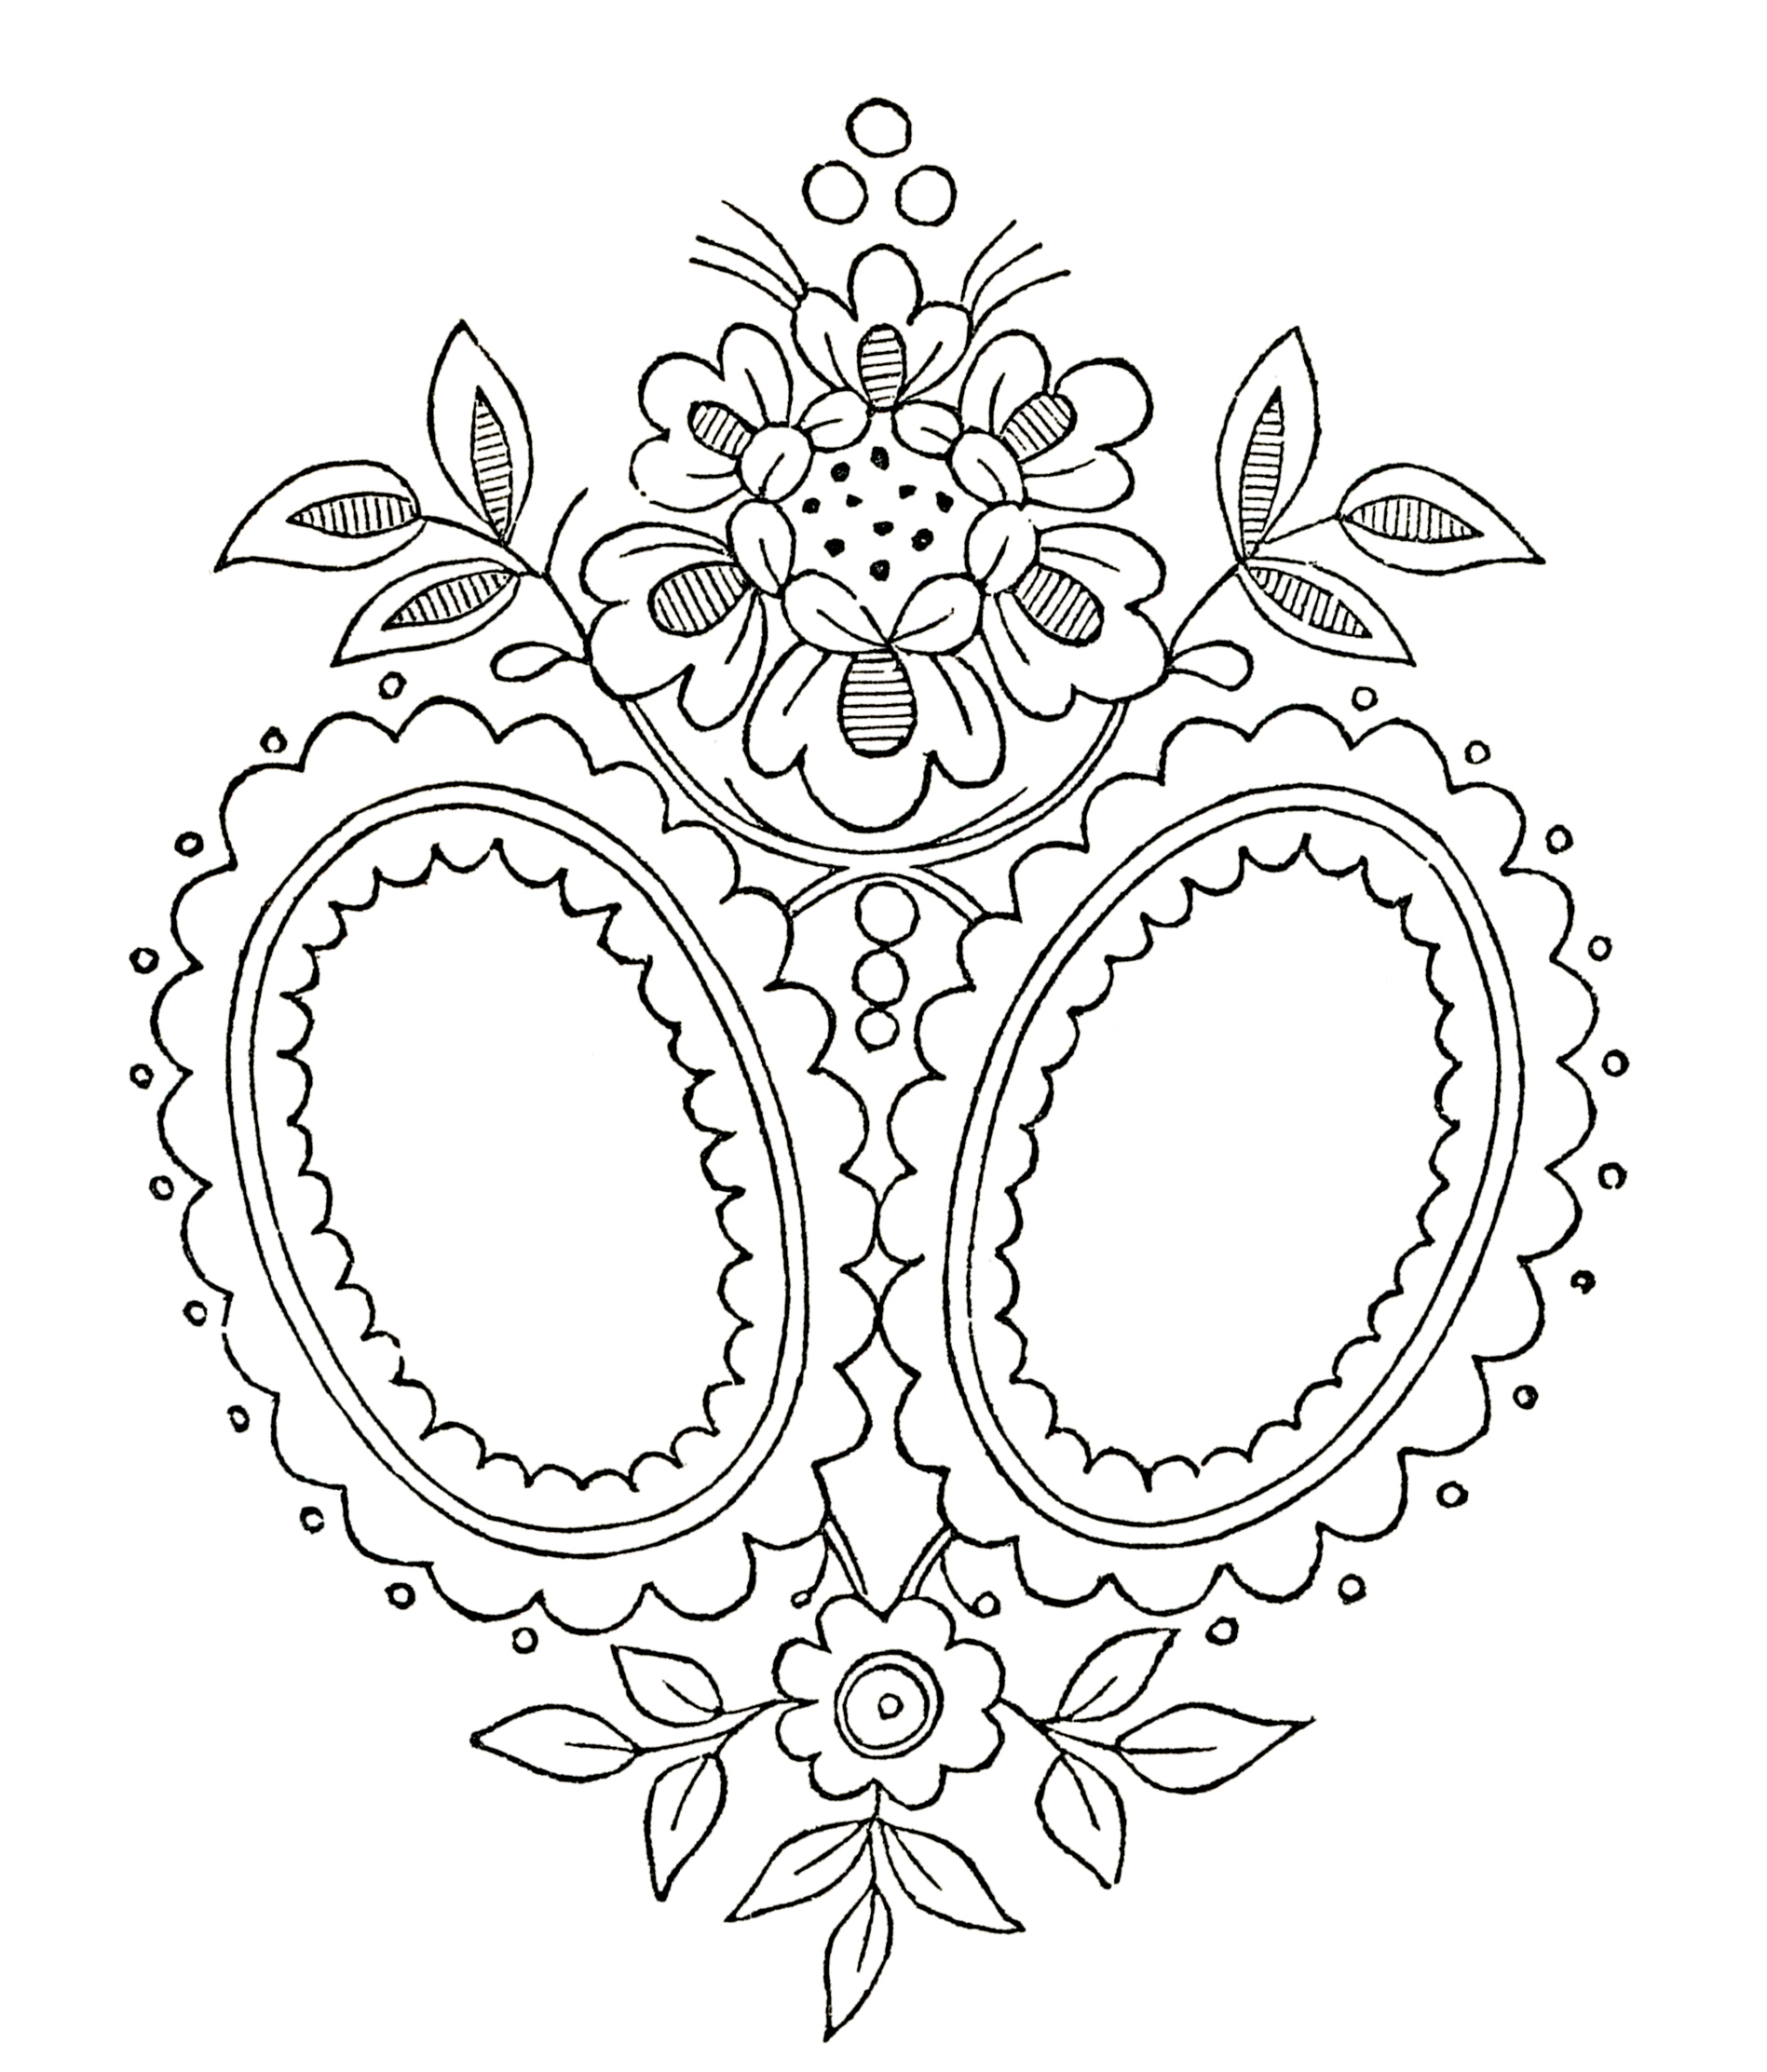 Victorian Embroidery Patterns Vintage Monogram Embroidery Pattern The Graphics Fairy